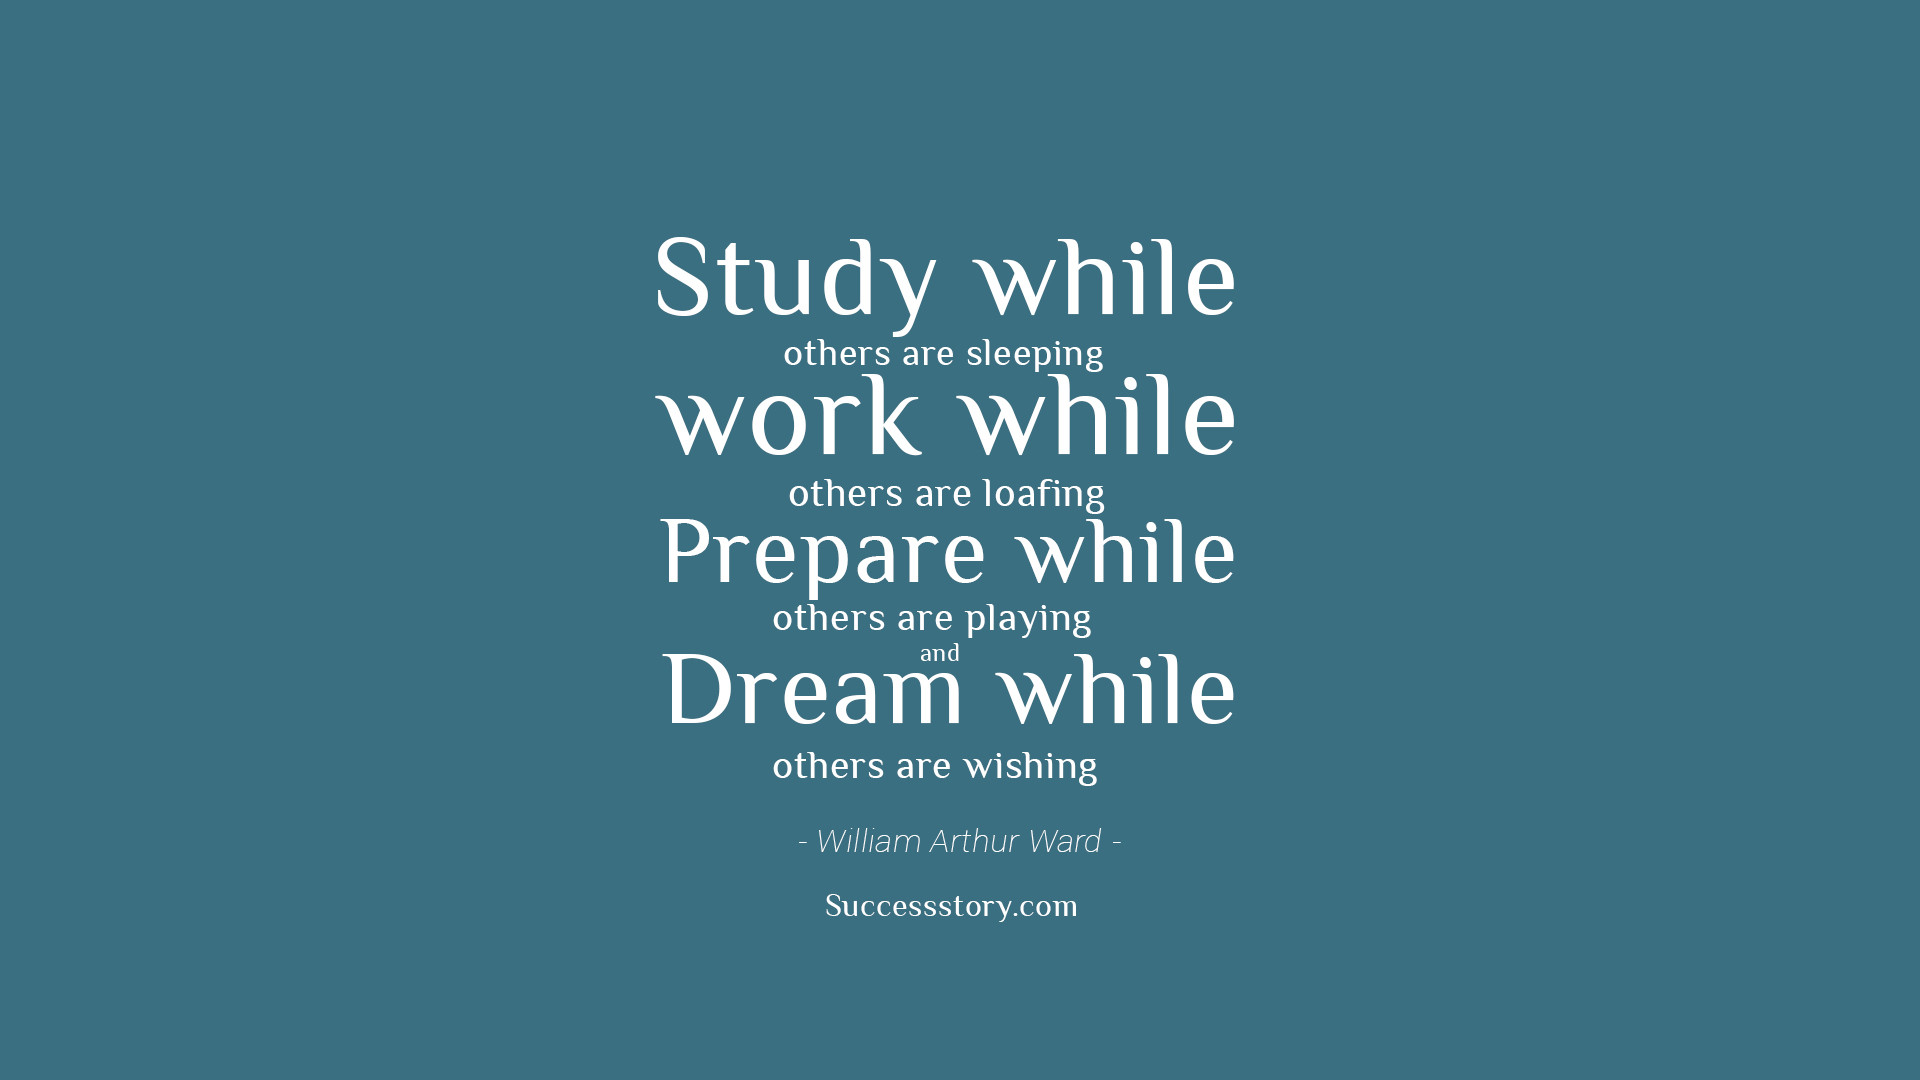 Motivational Quotes For Students
 Inspirational Quotes For Student Success QuotesGram